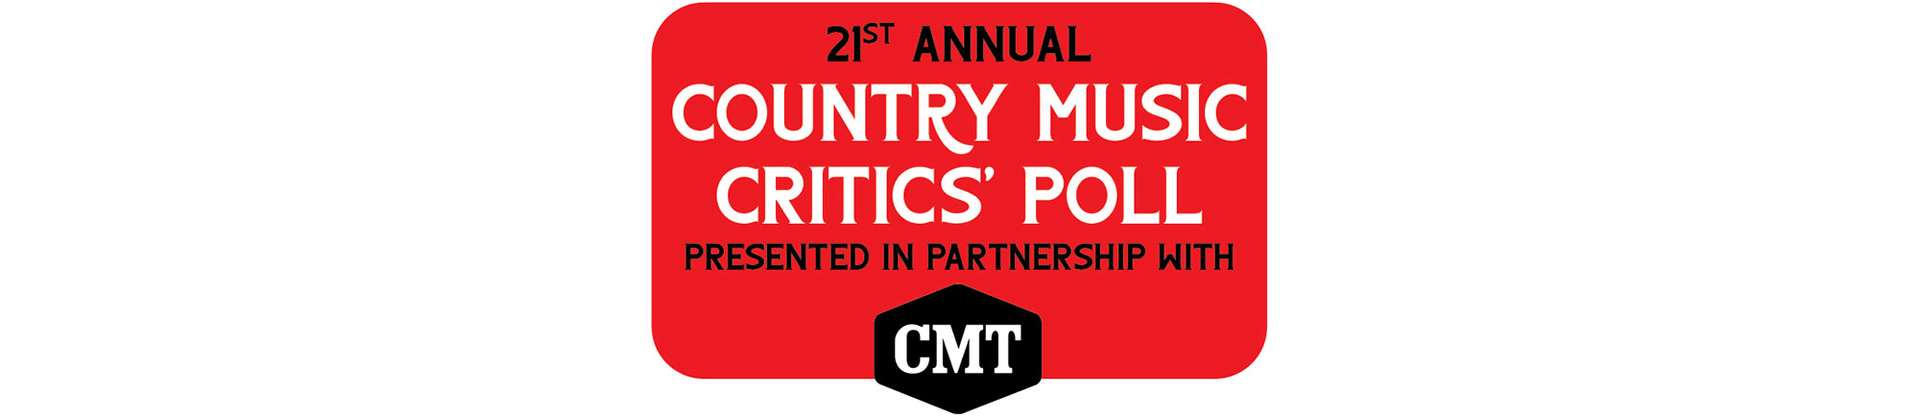 21st Annual Country Music Critics’ Poll: The Comments